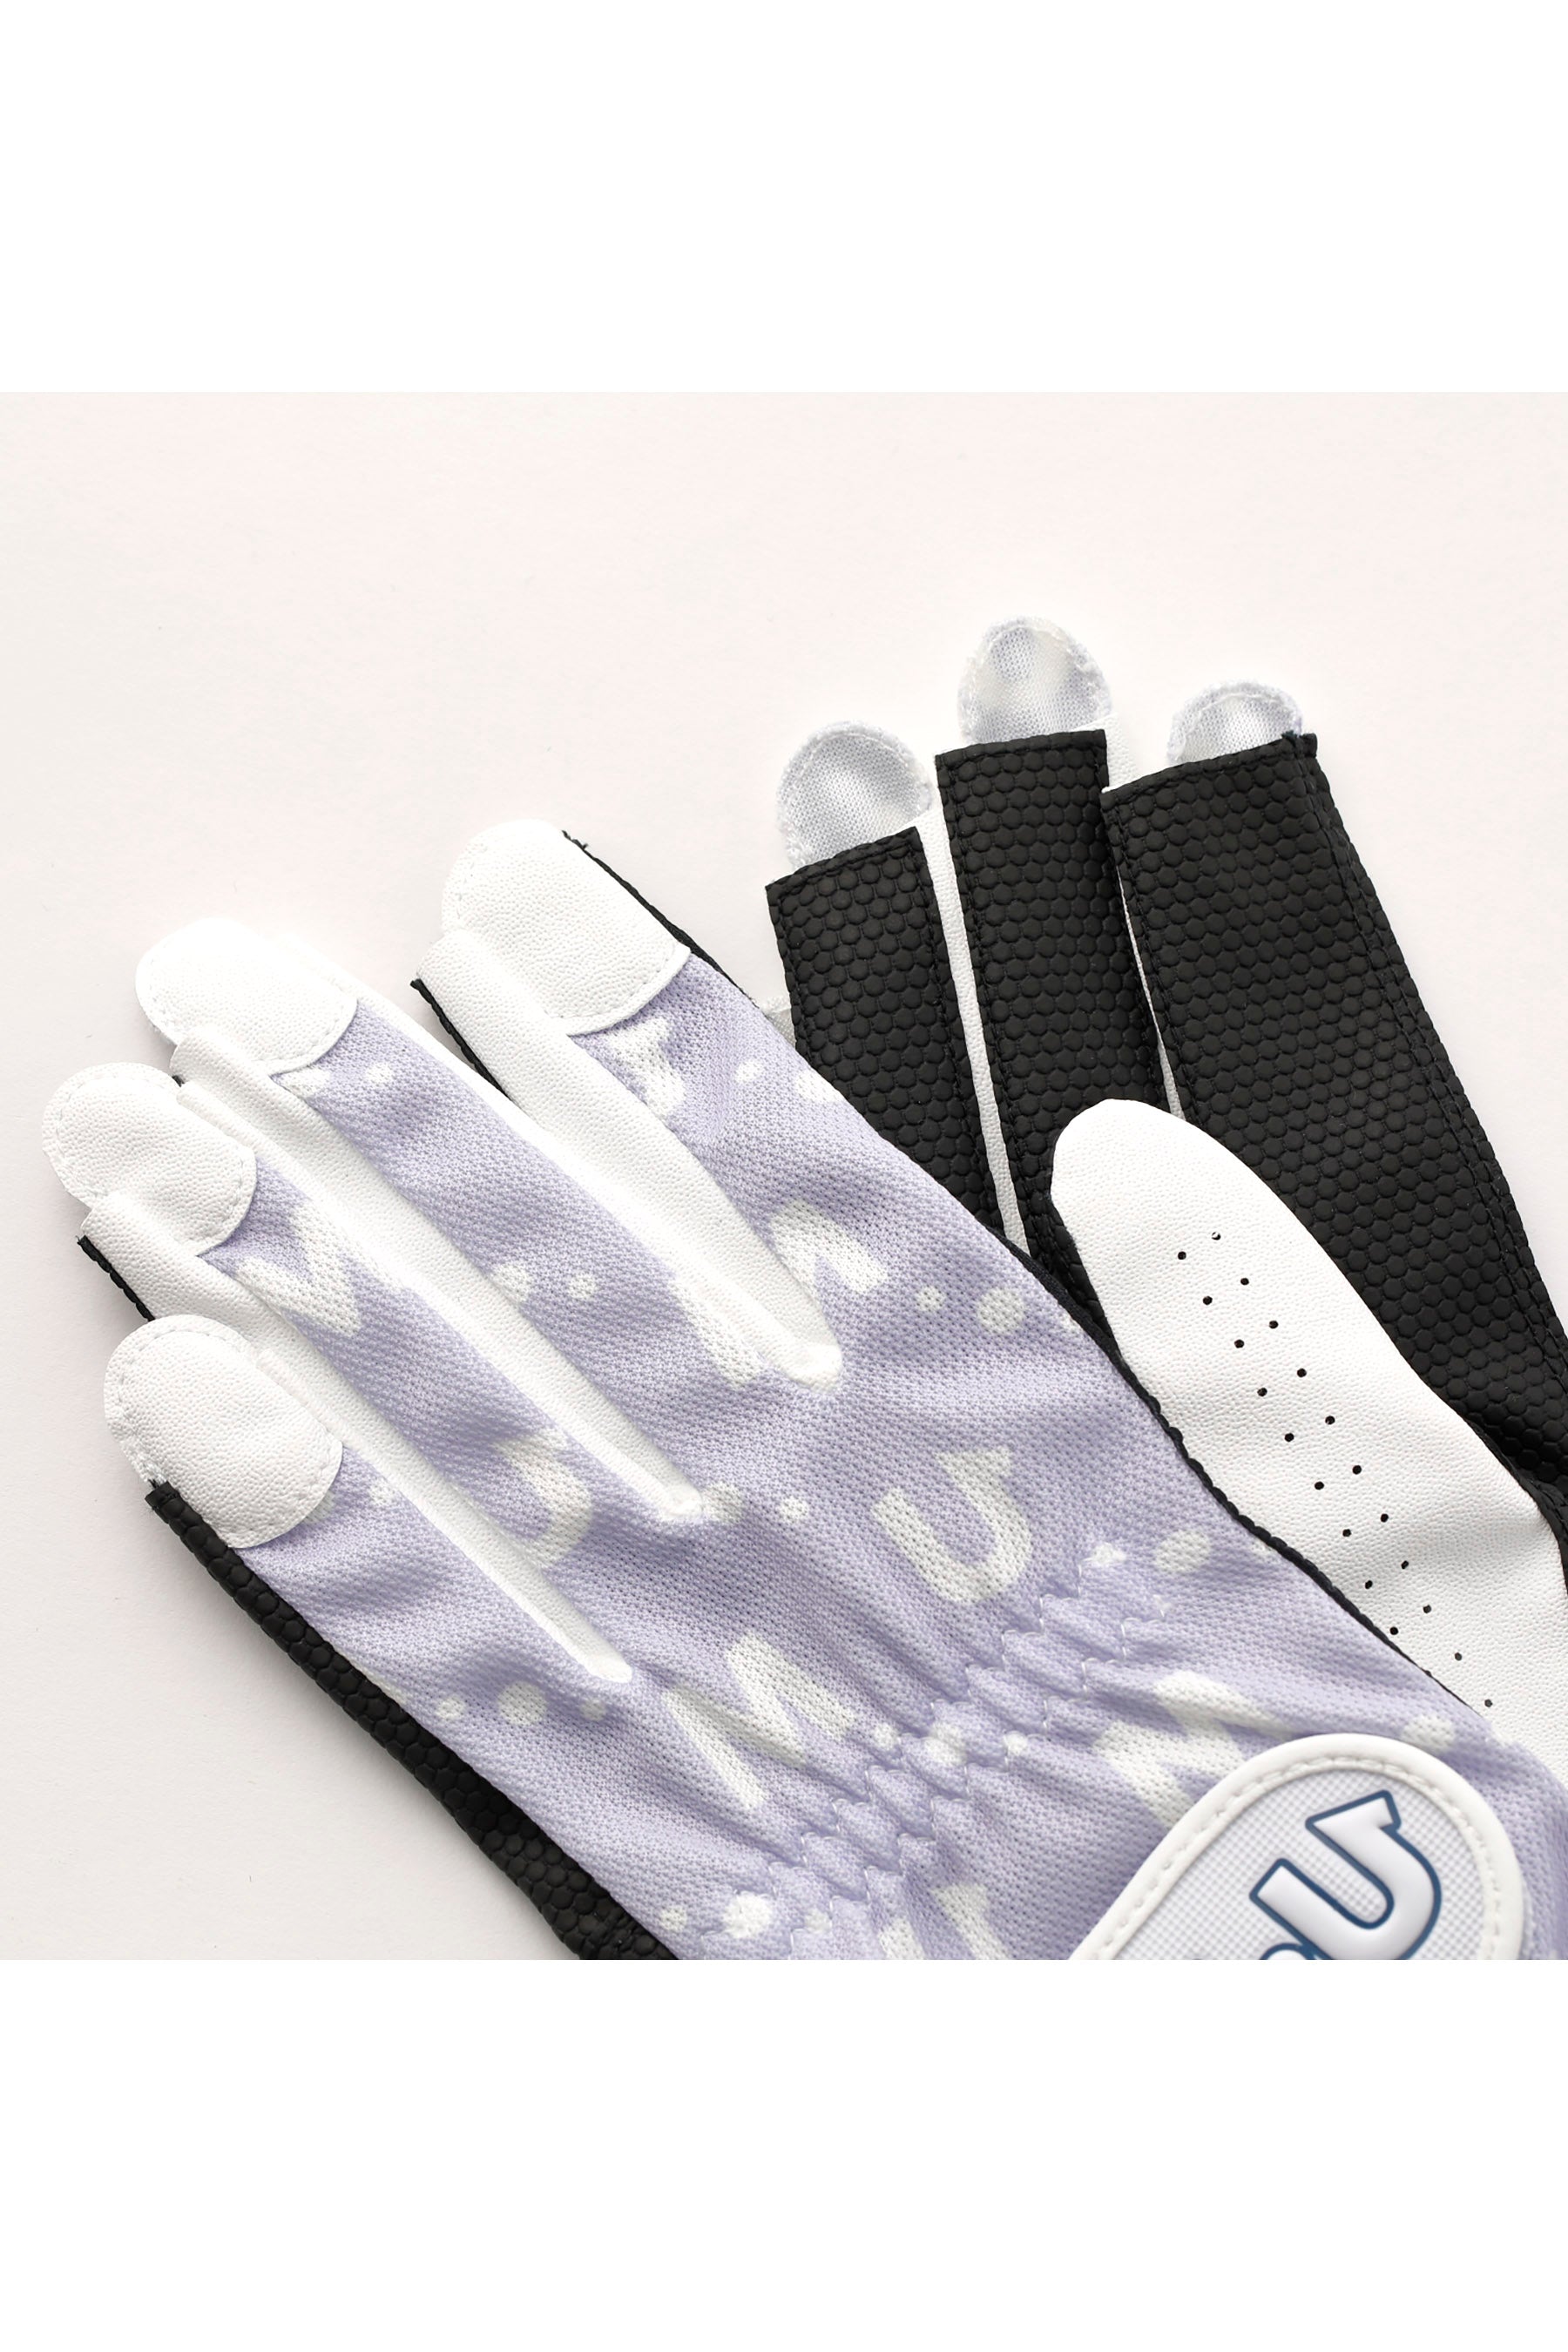 Monogram all-over logo two-handed gloves without fingertips (703Q1804)